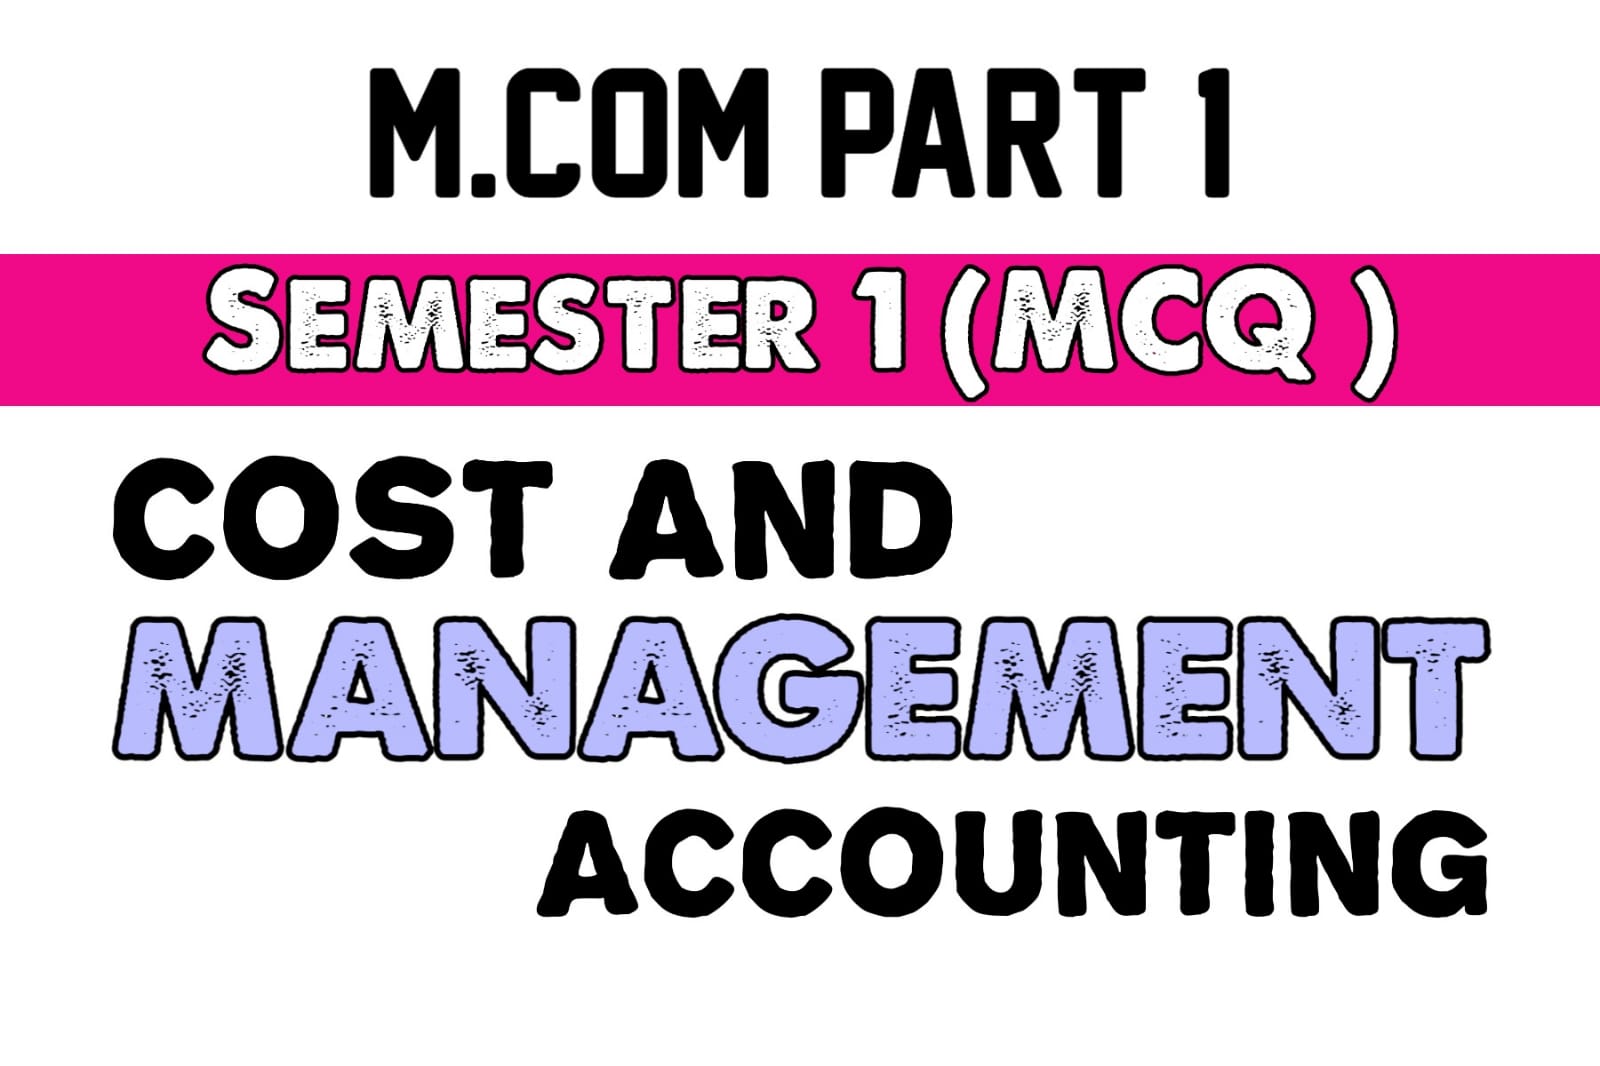 Cost and management accounting M.com Part 1 mcqs